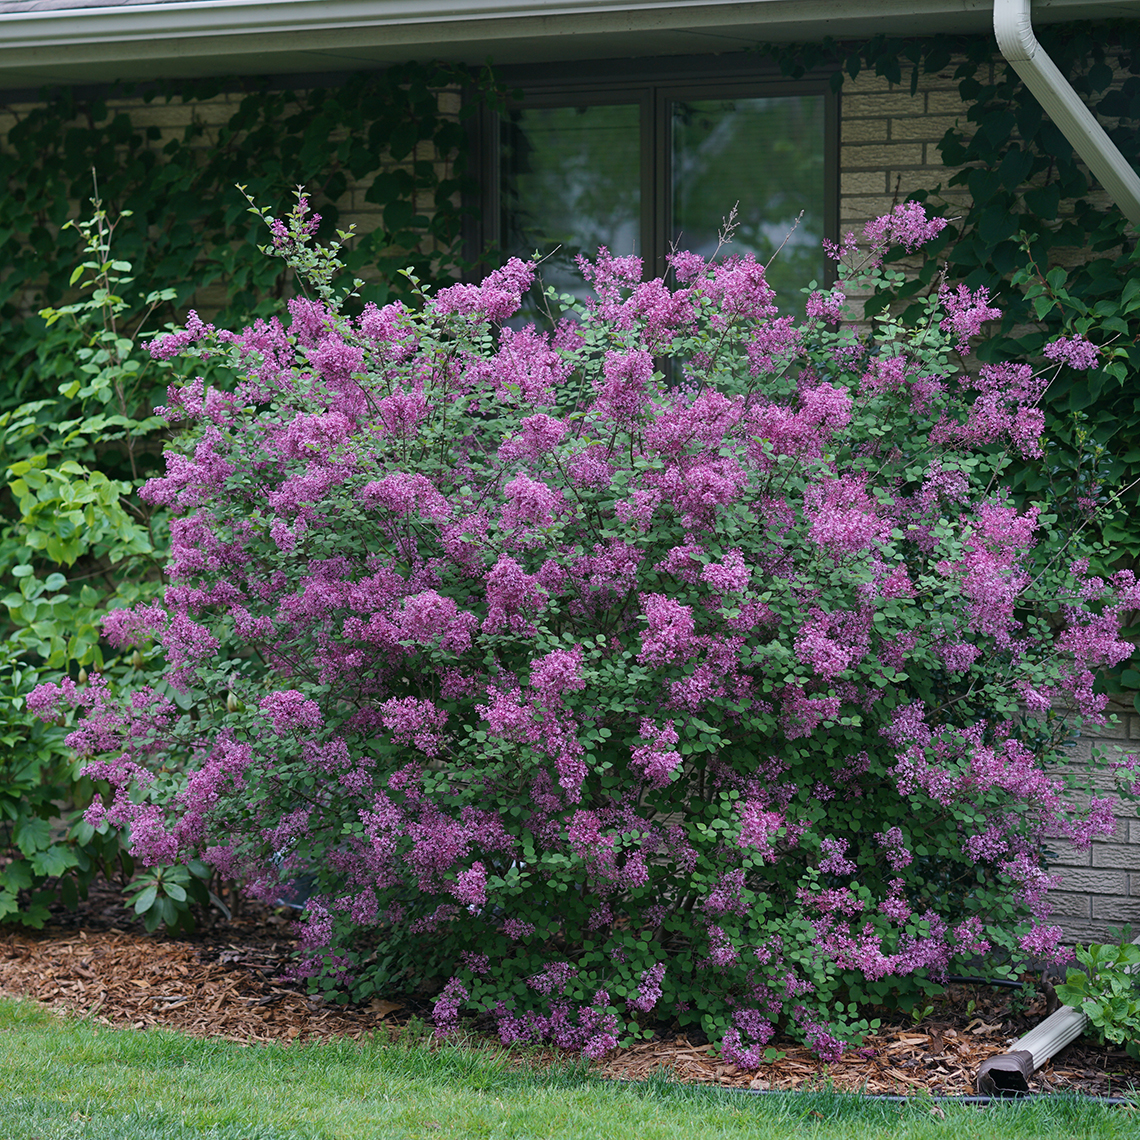 Bloomerang Dark Purple lilac planted in front of a brick home